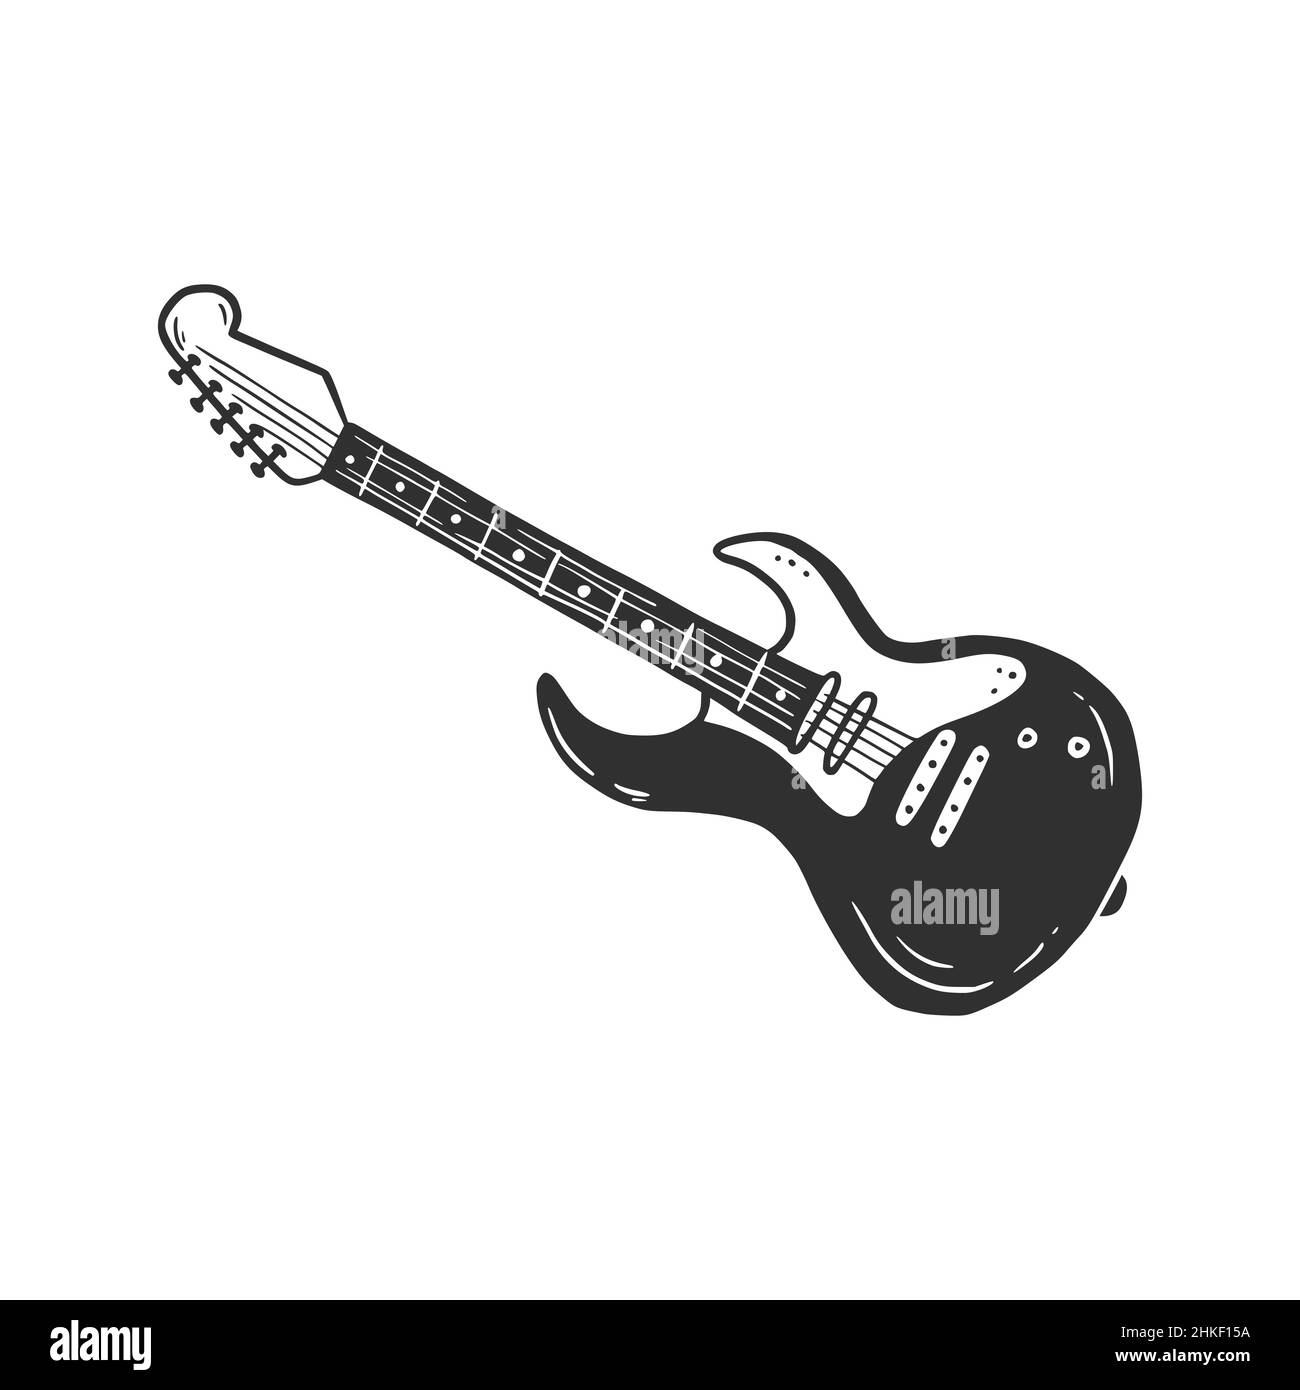 How to Draw a Guitar  Easy Art Tutorial  Art by Ro